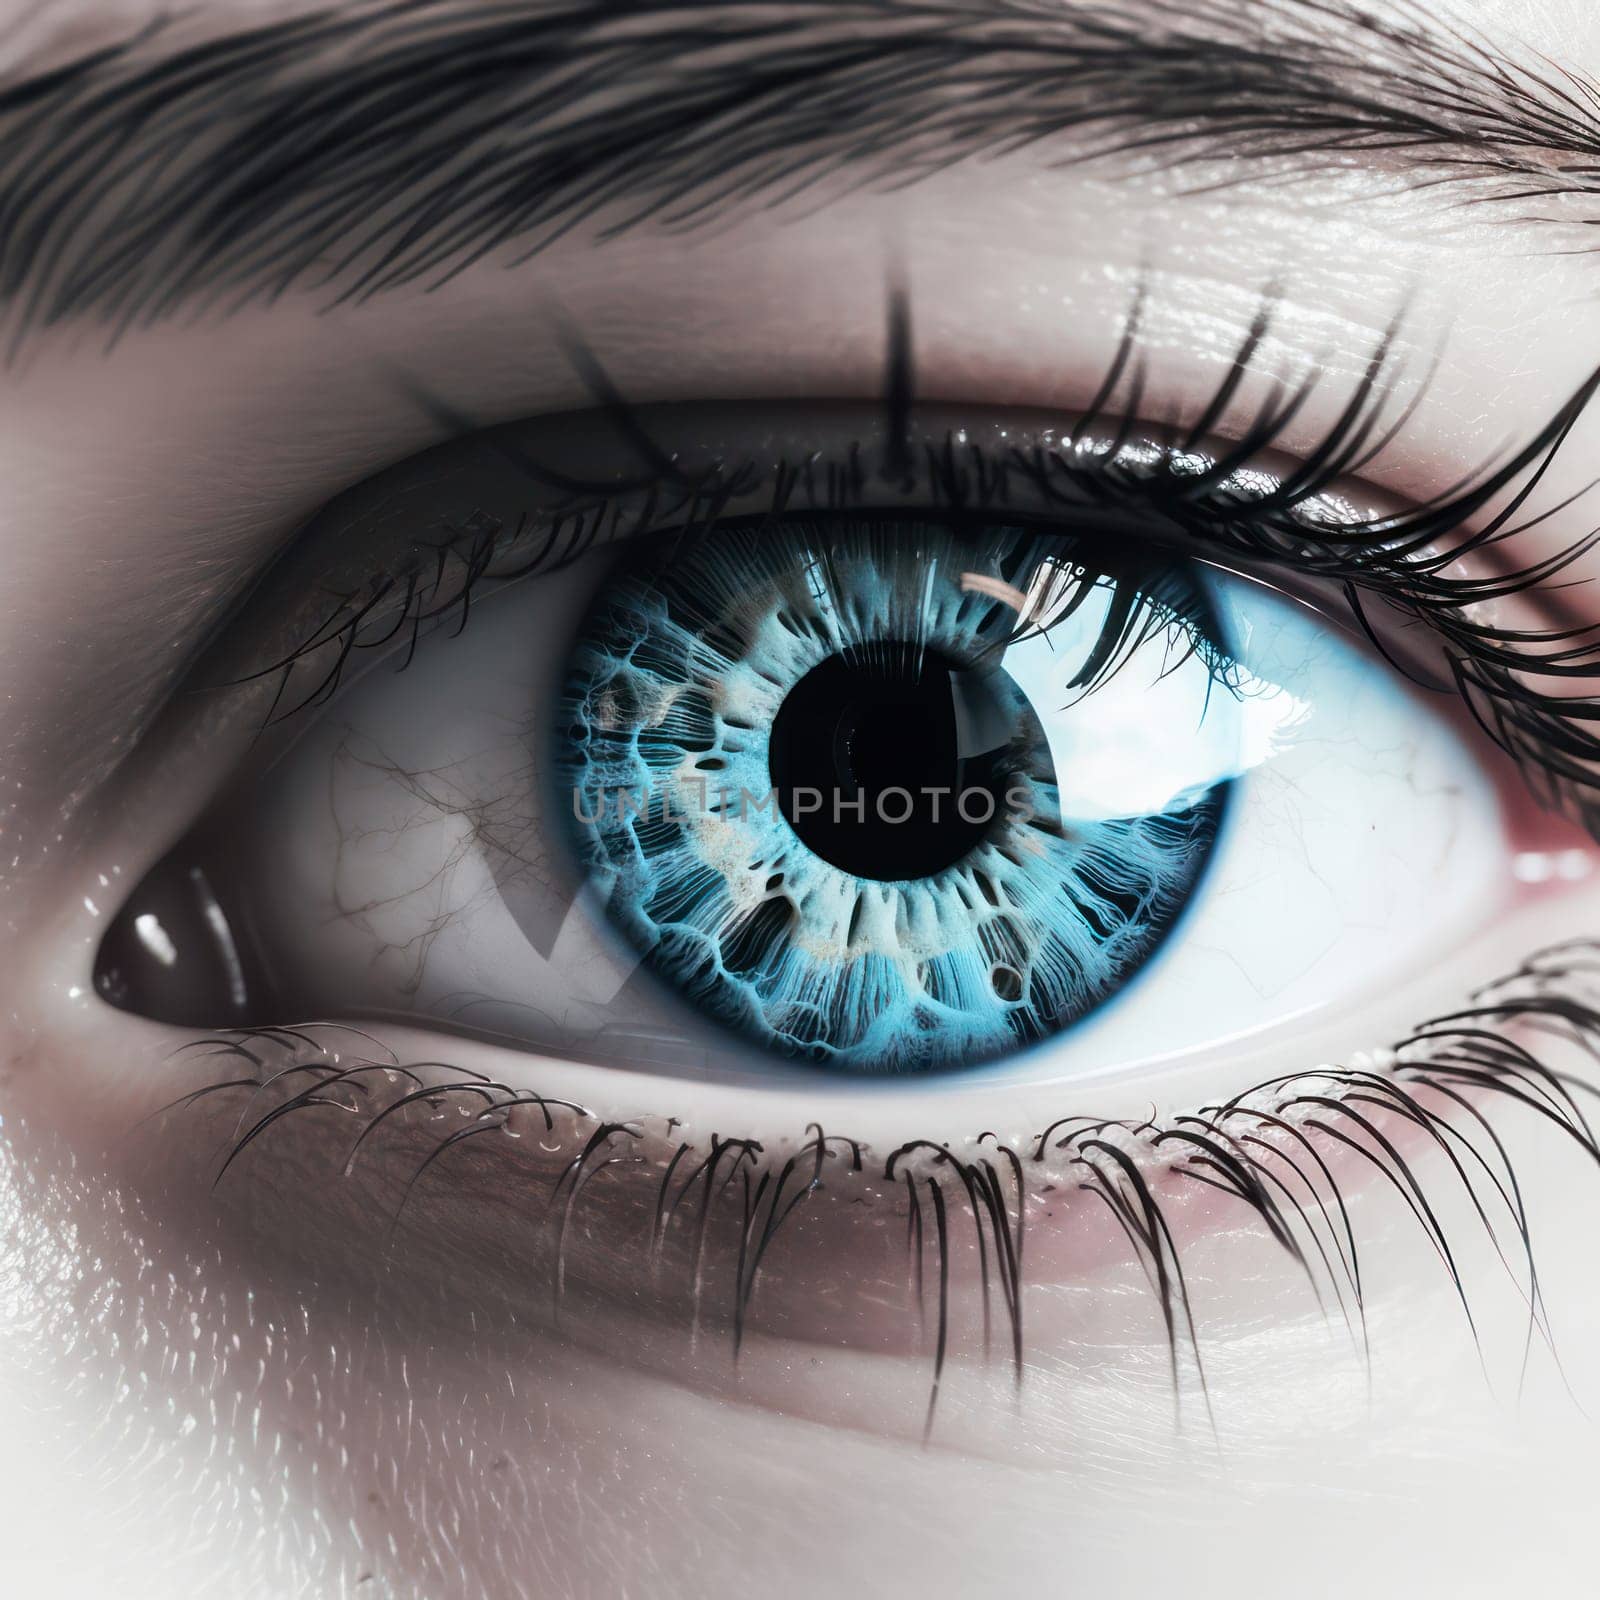 Intense Beauty - A Close-up Portrait of a Young Woman's Blue Eye, Emphasizing its Macro Detail and Expressive Emotions